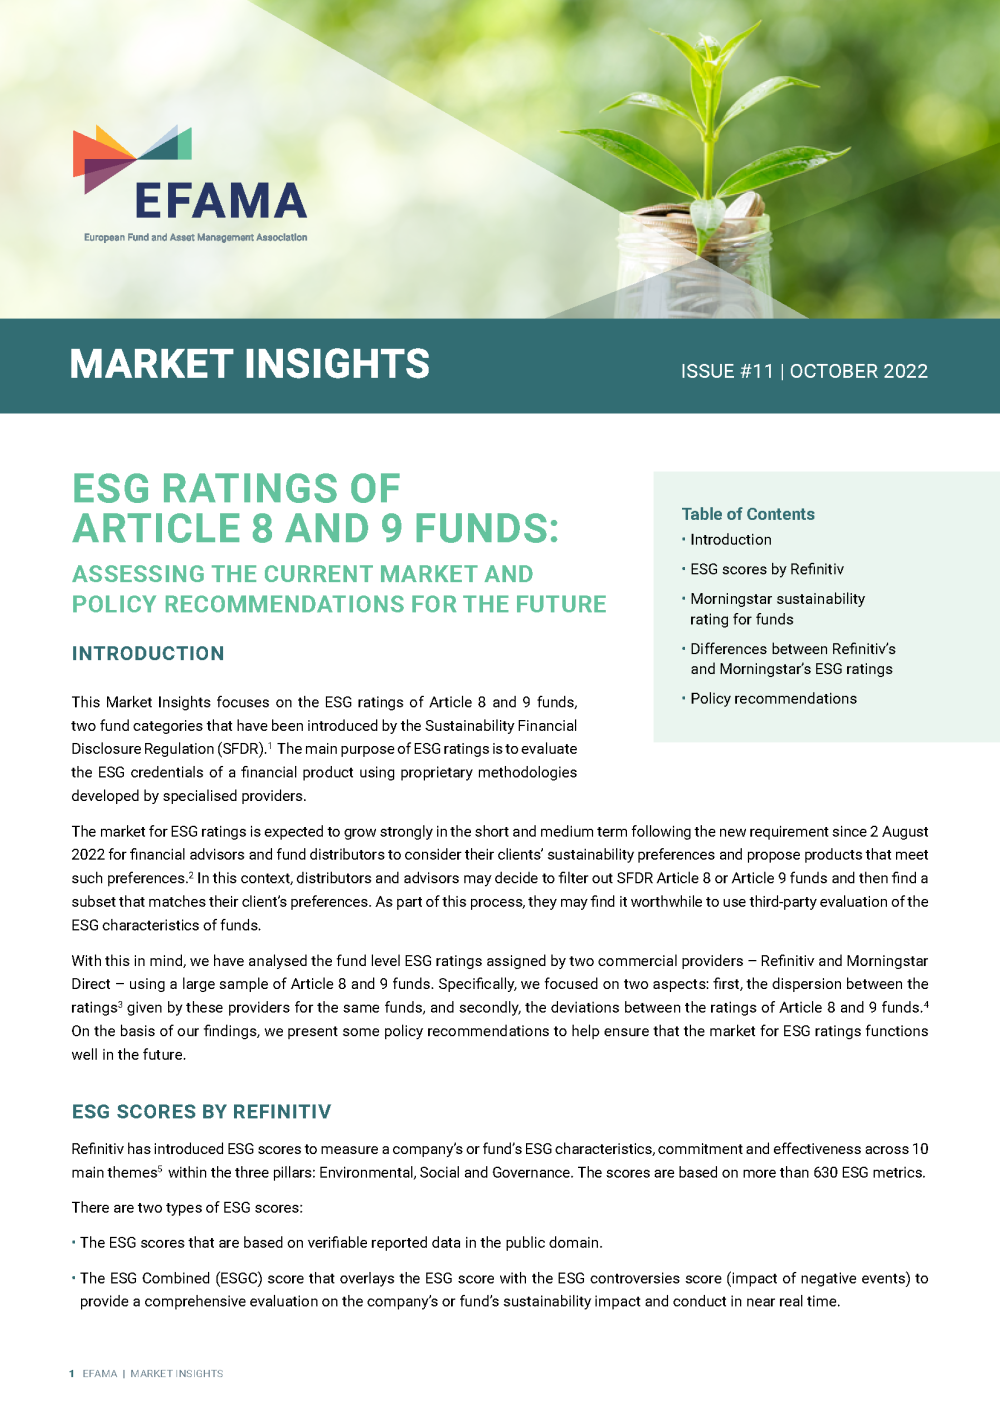 Image of the first page of the Market Insights